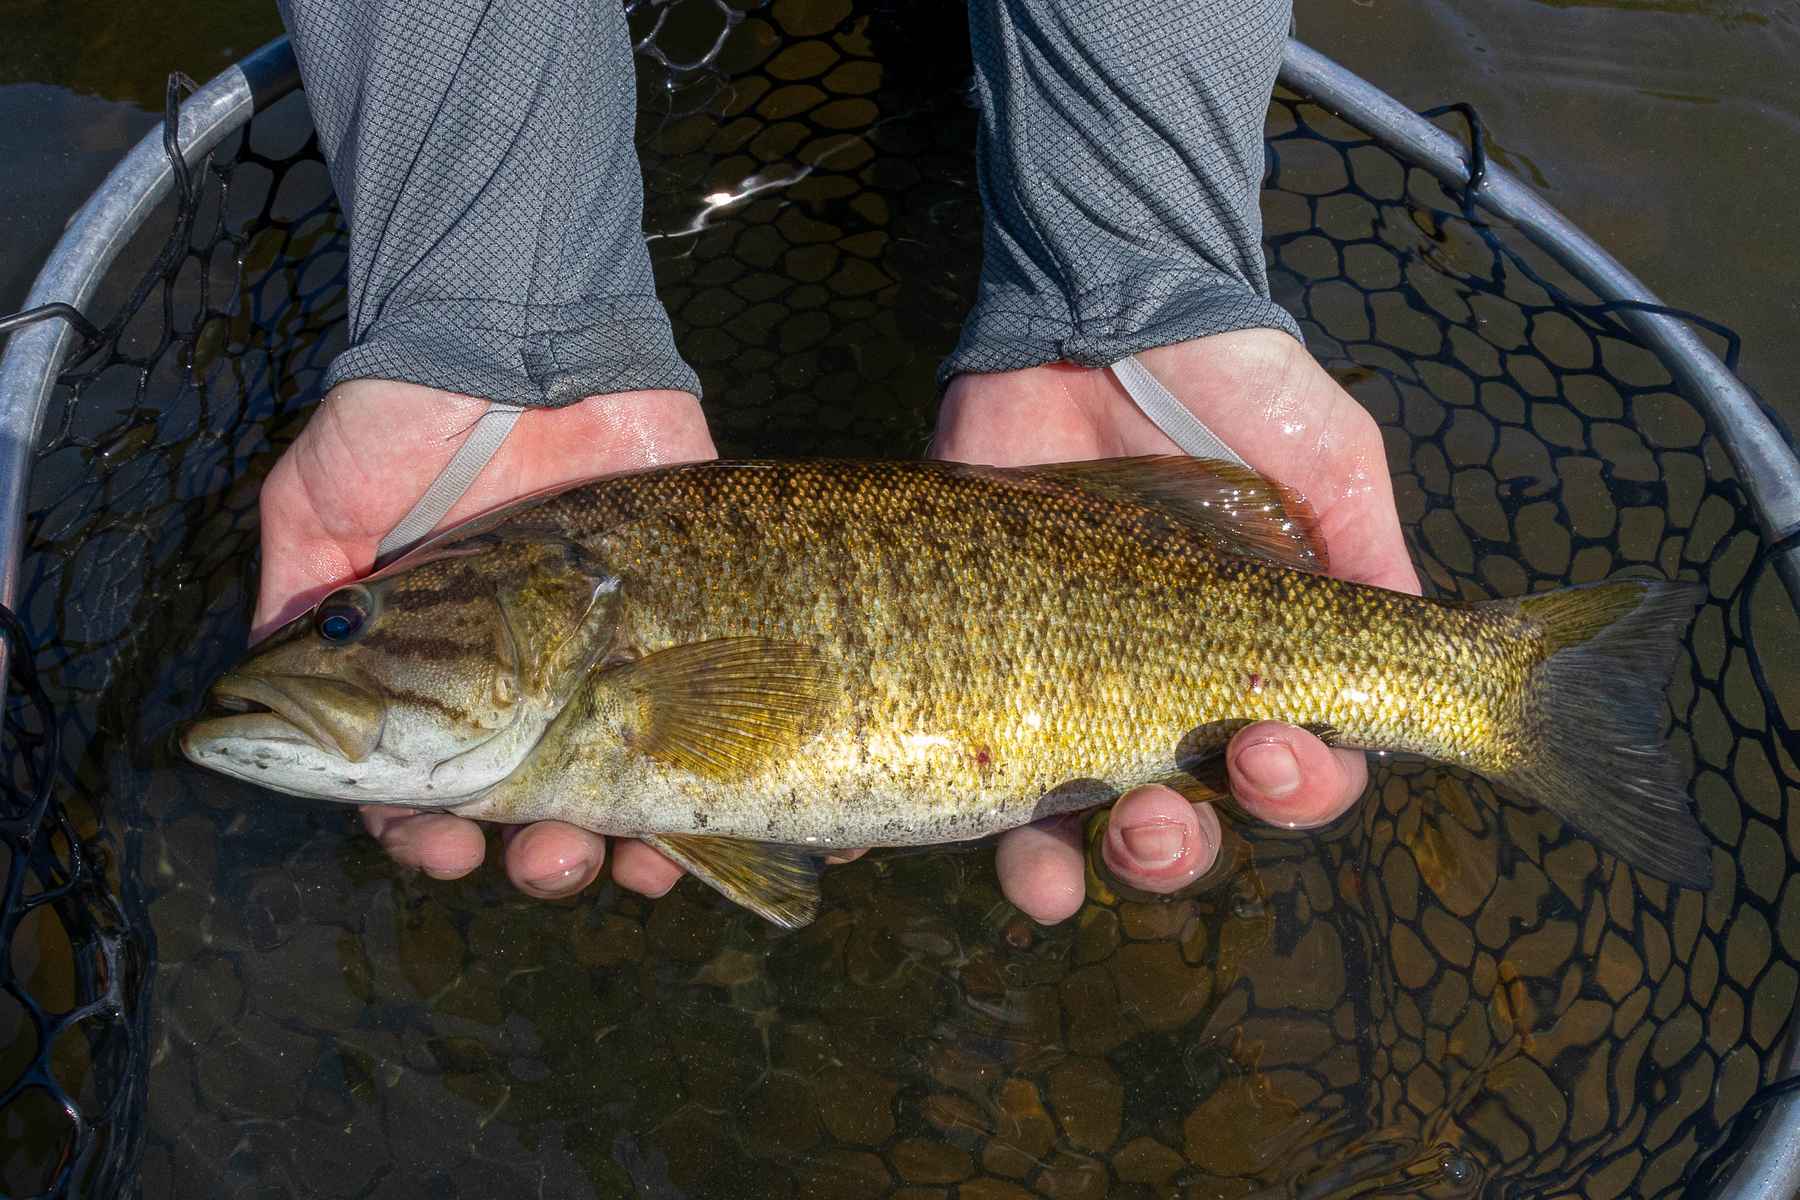 Southern smallies: The genetically unique smallmouth bass of Oklahoma